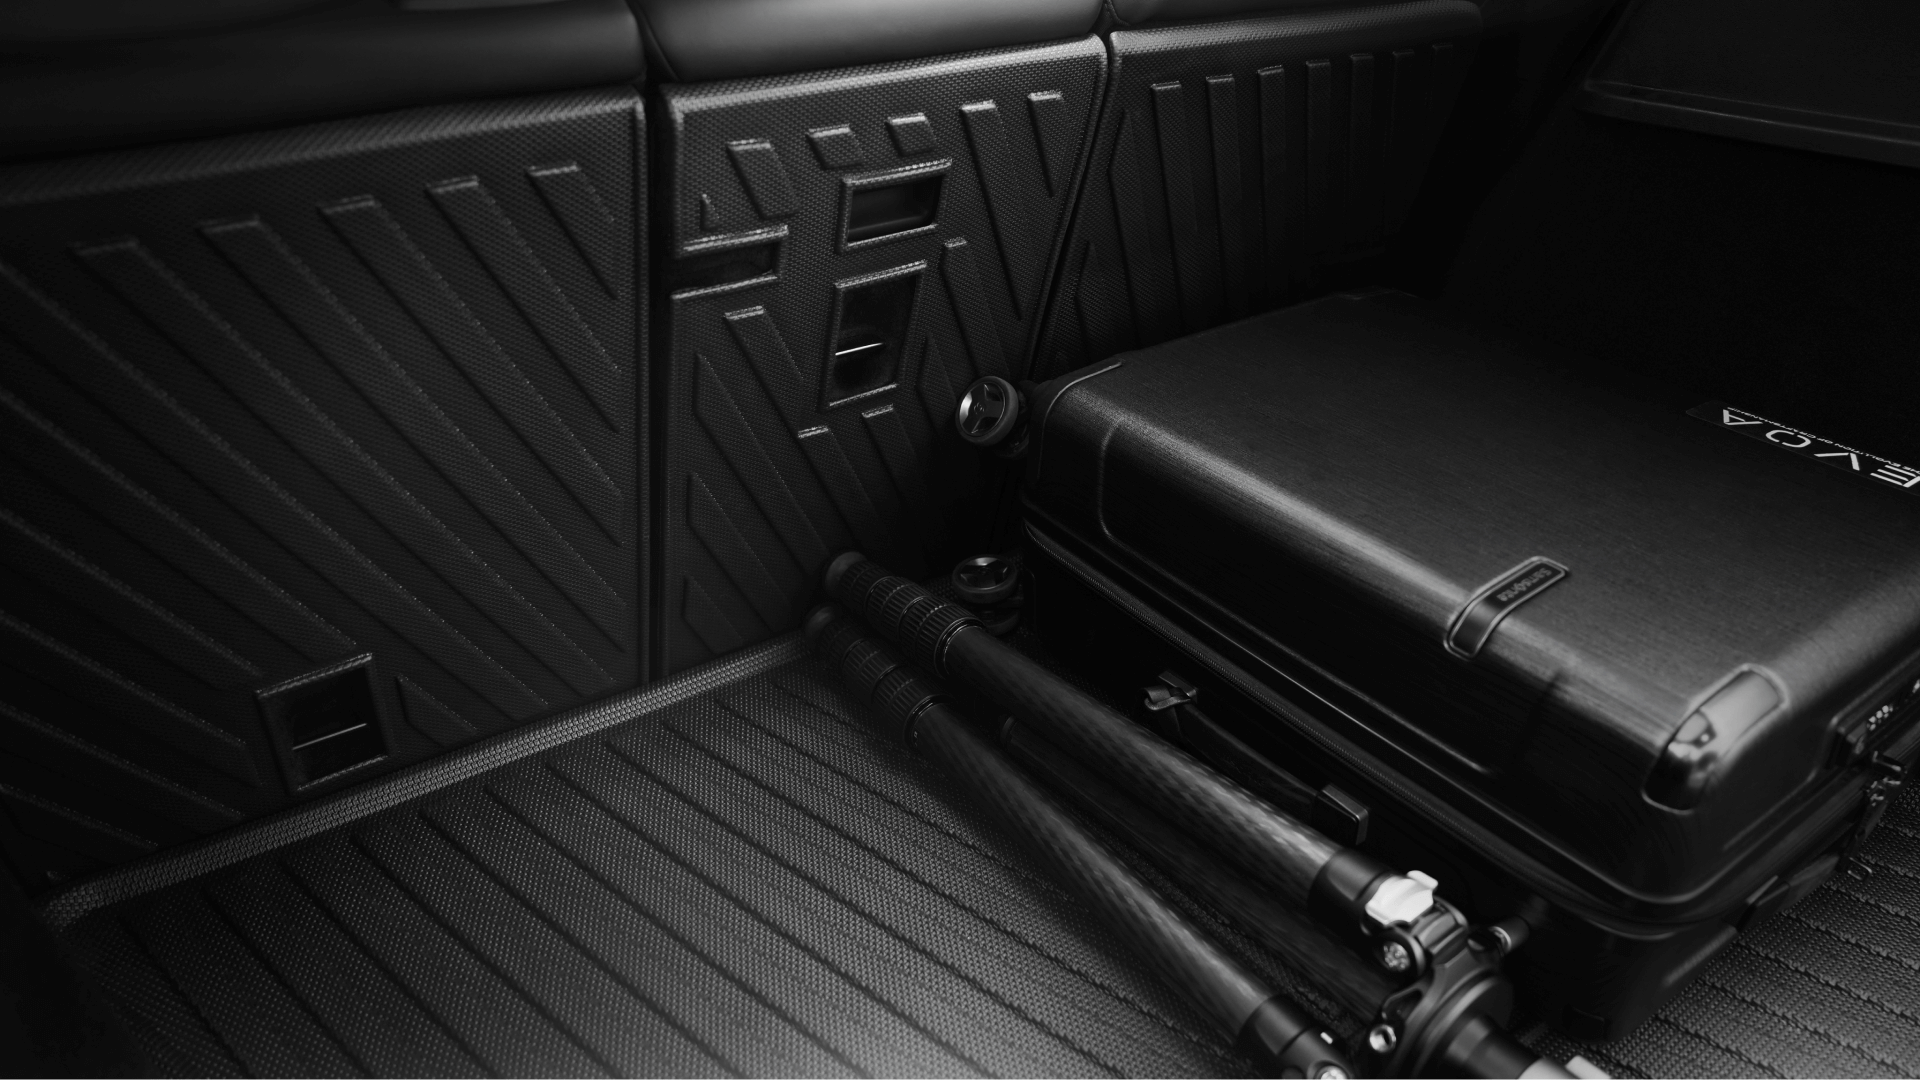 Model Y Rear Seats Back Cover protect your seat when store items inside